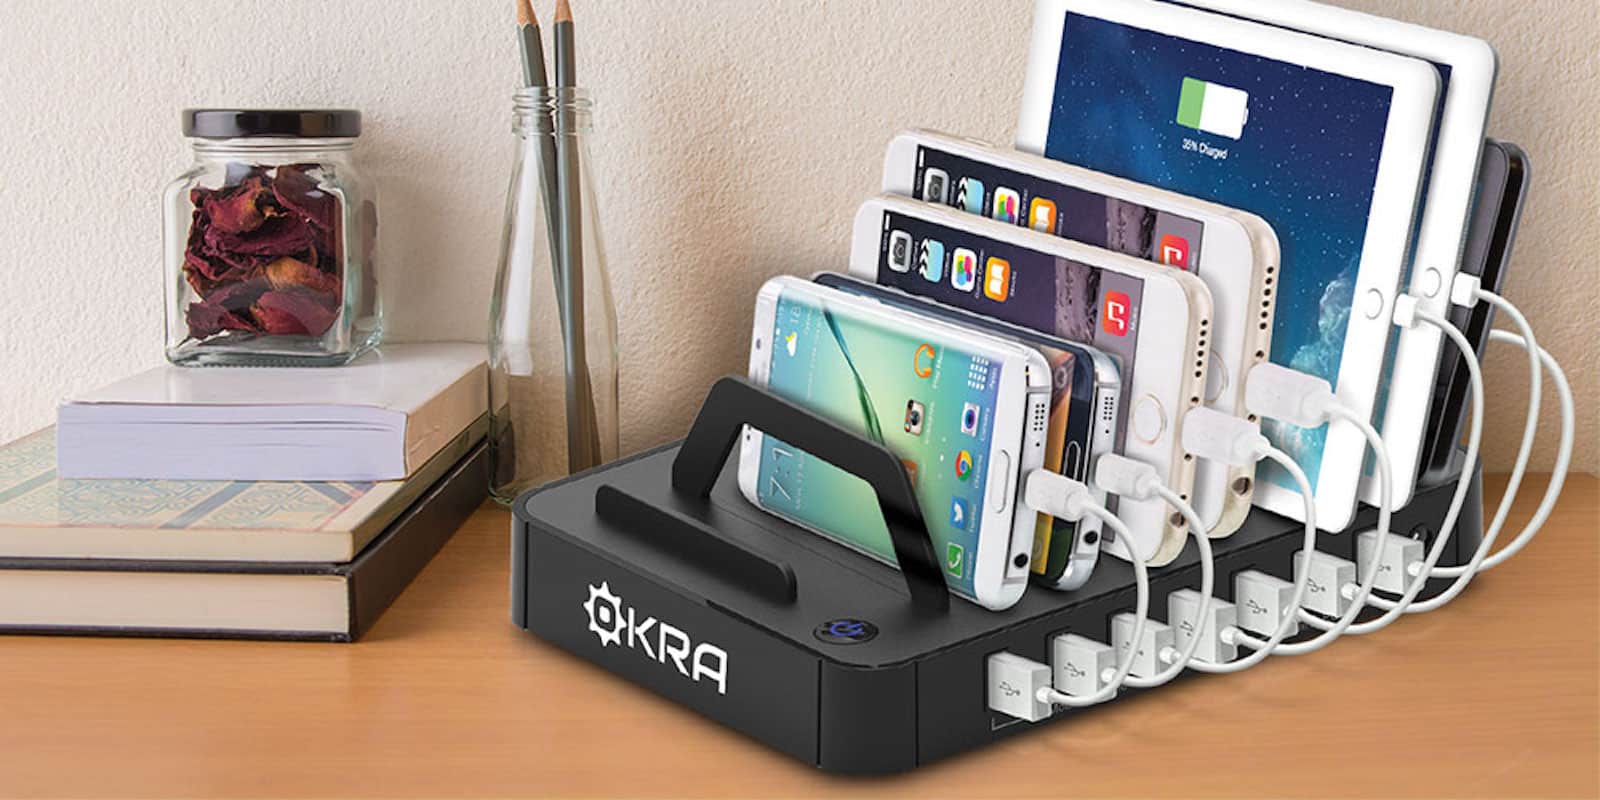 With slots for 7 devices, this charging hub makes sure the tabletops are clear and everyone's devices juiced up.